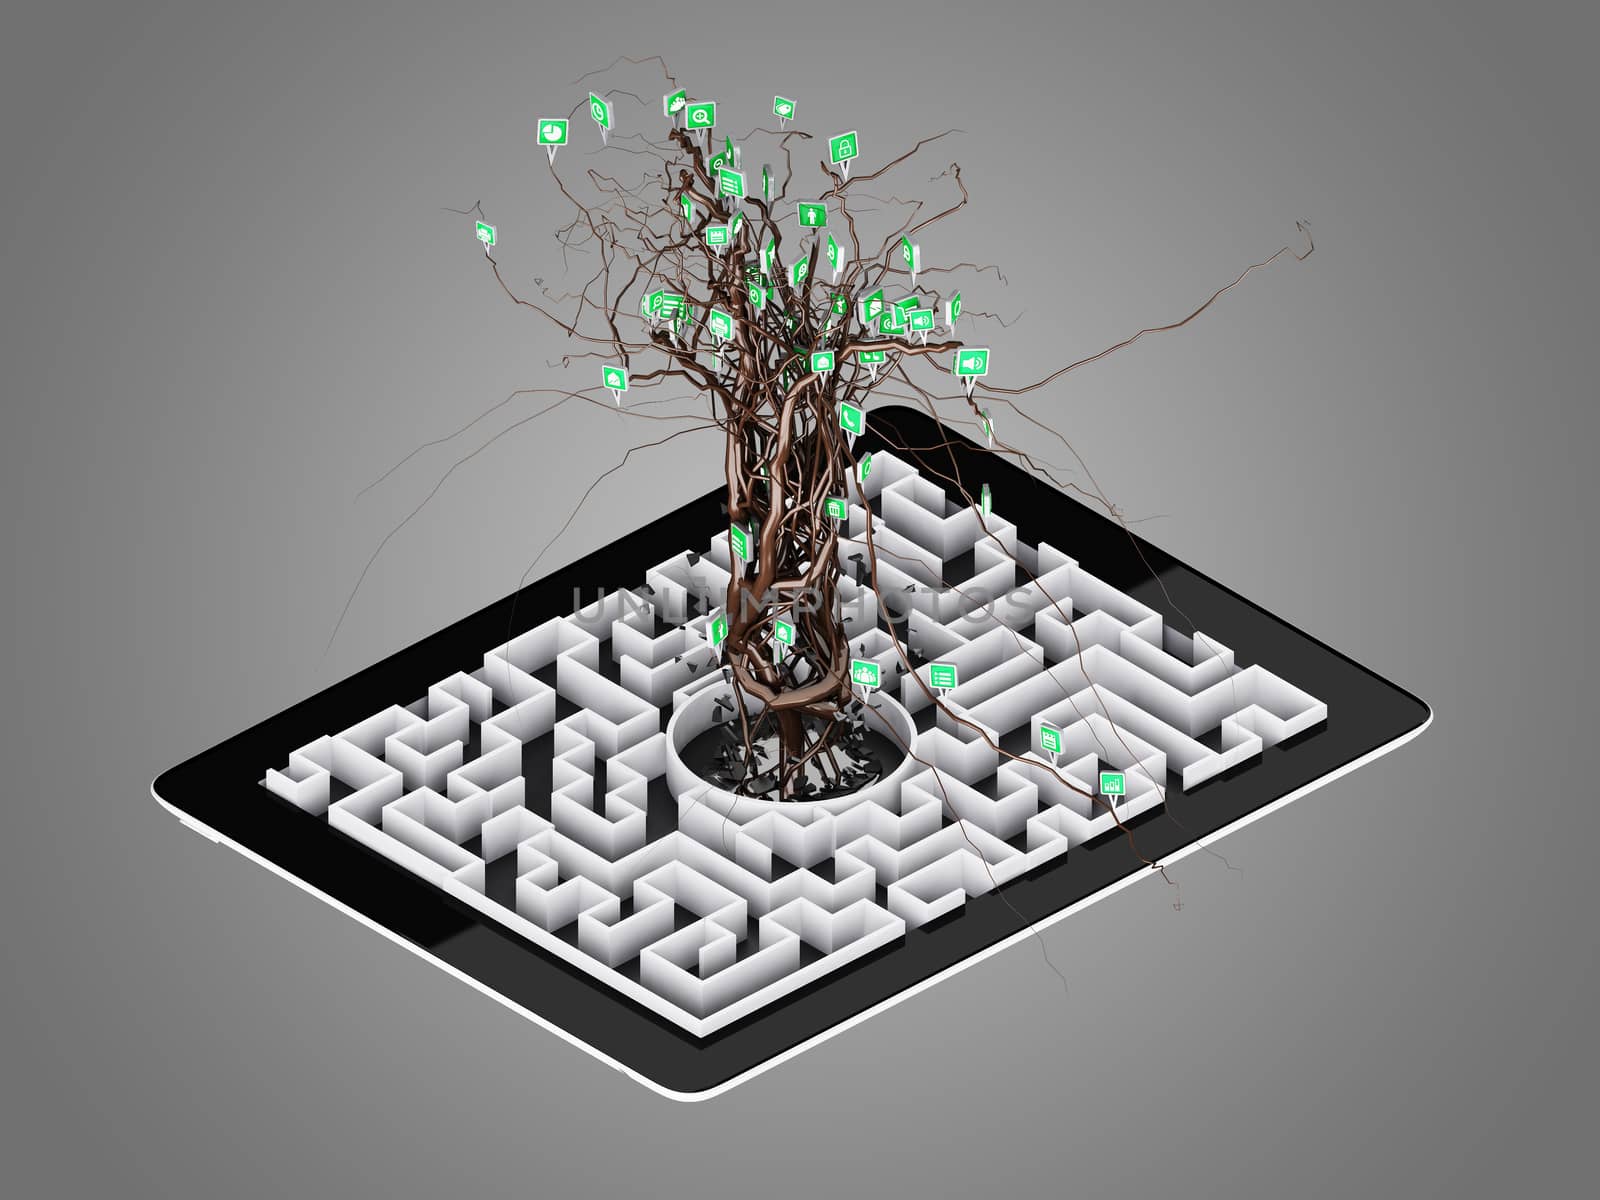 Social media icons set in tree shape on Maze in the tablet., concept